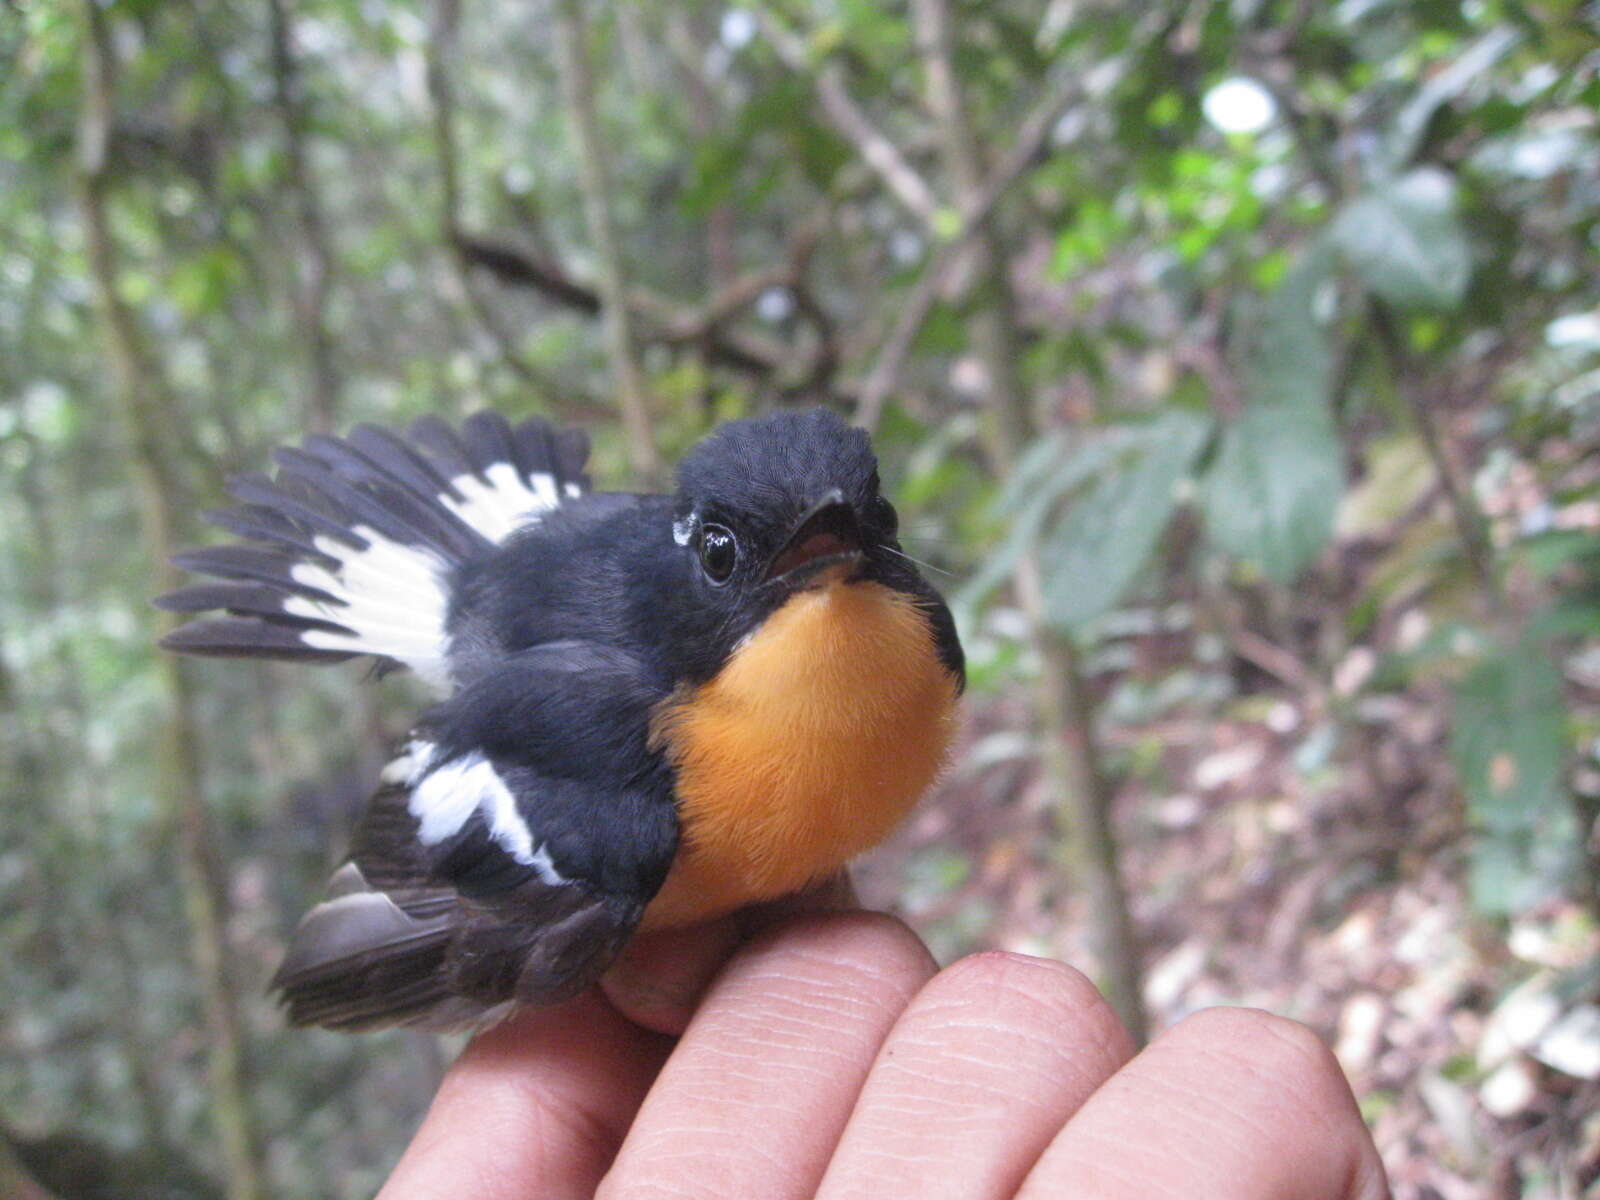 Image of Rufous-chested Flycatcher